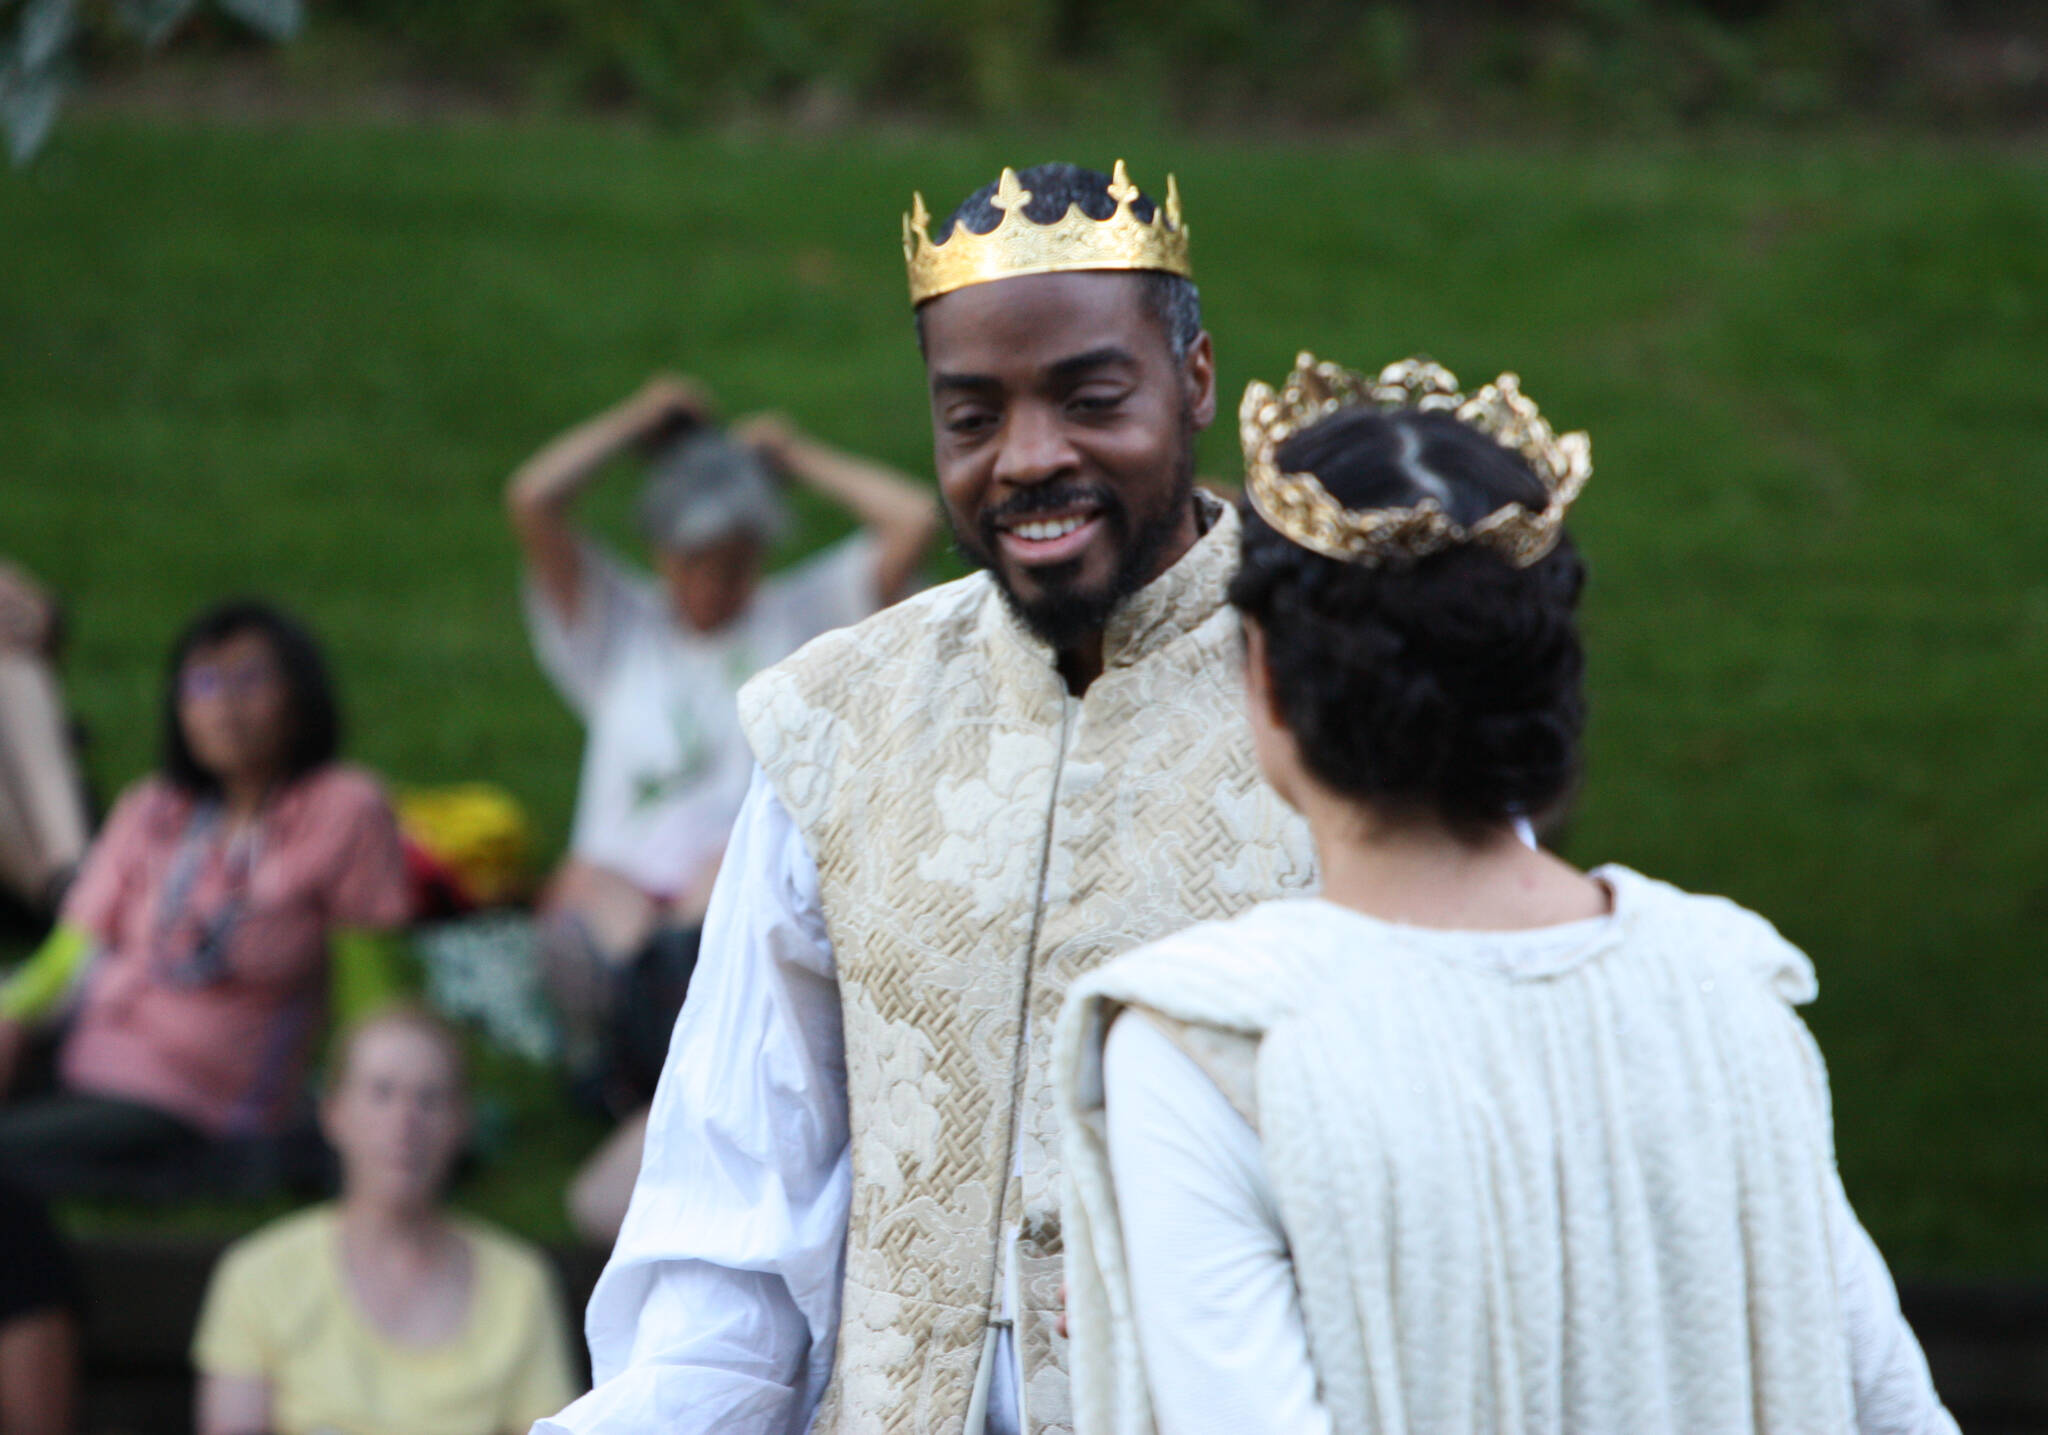 Seattle Shakespeare Company and Wooden O presented “A Midsummer Night’s Dream” on July 14 at the Luther Burbank Park Amphitheatre. For more information on upcoming performances, visit https://www.seattleshakespeare.org/venue/luther-burbank-park-amphitheatre. Andy Nystrom/ staff photo